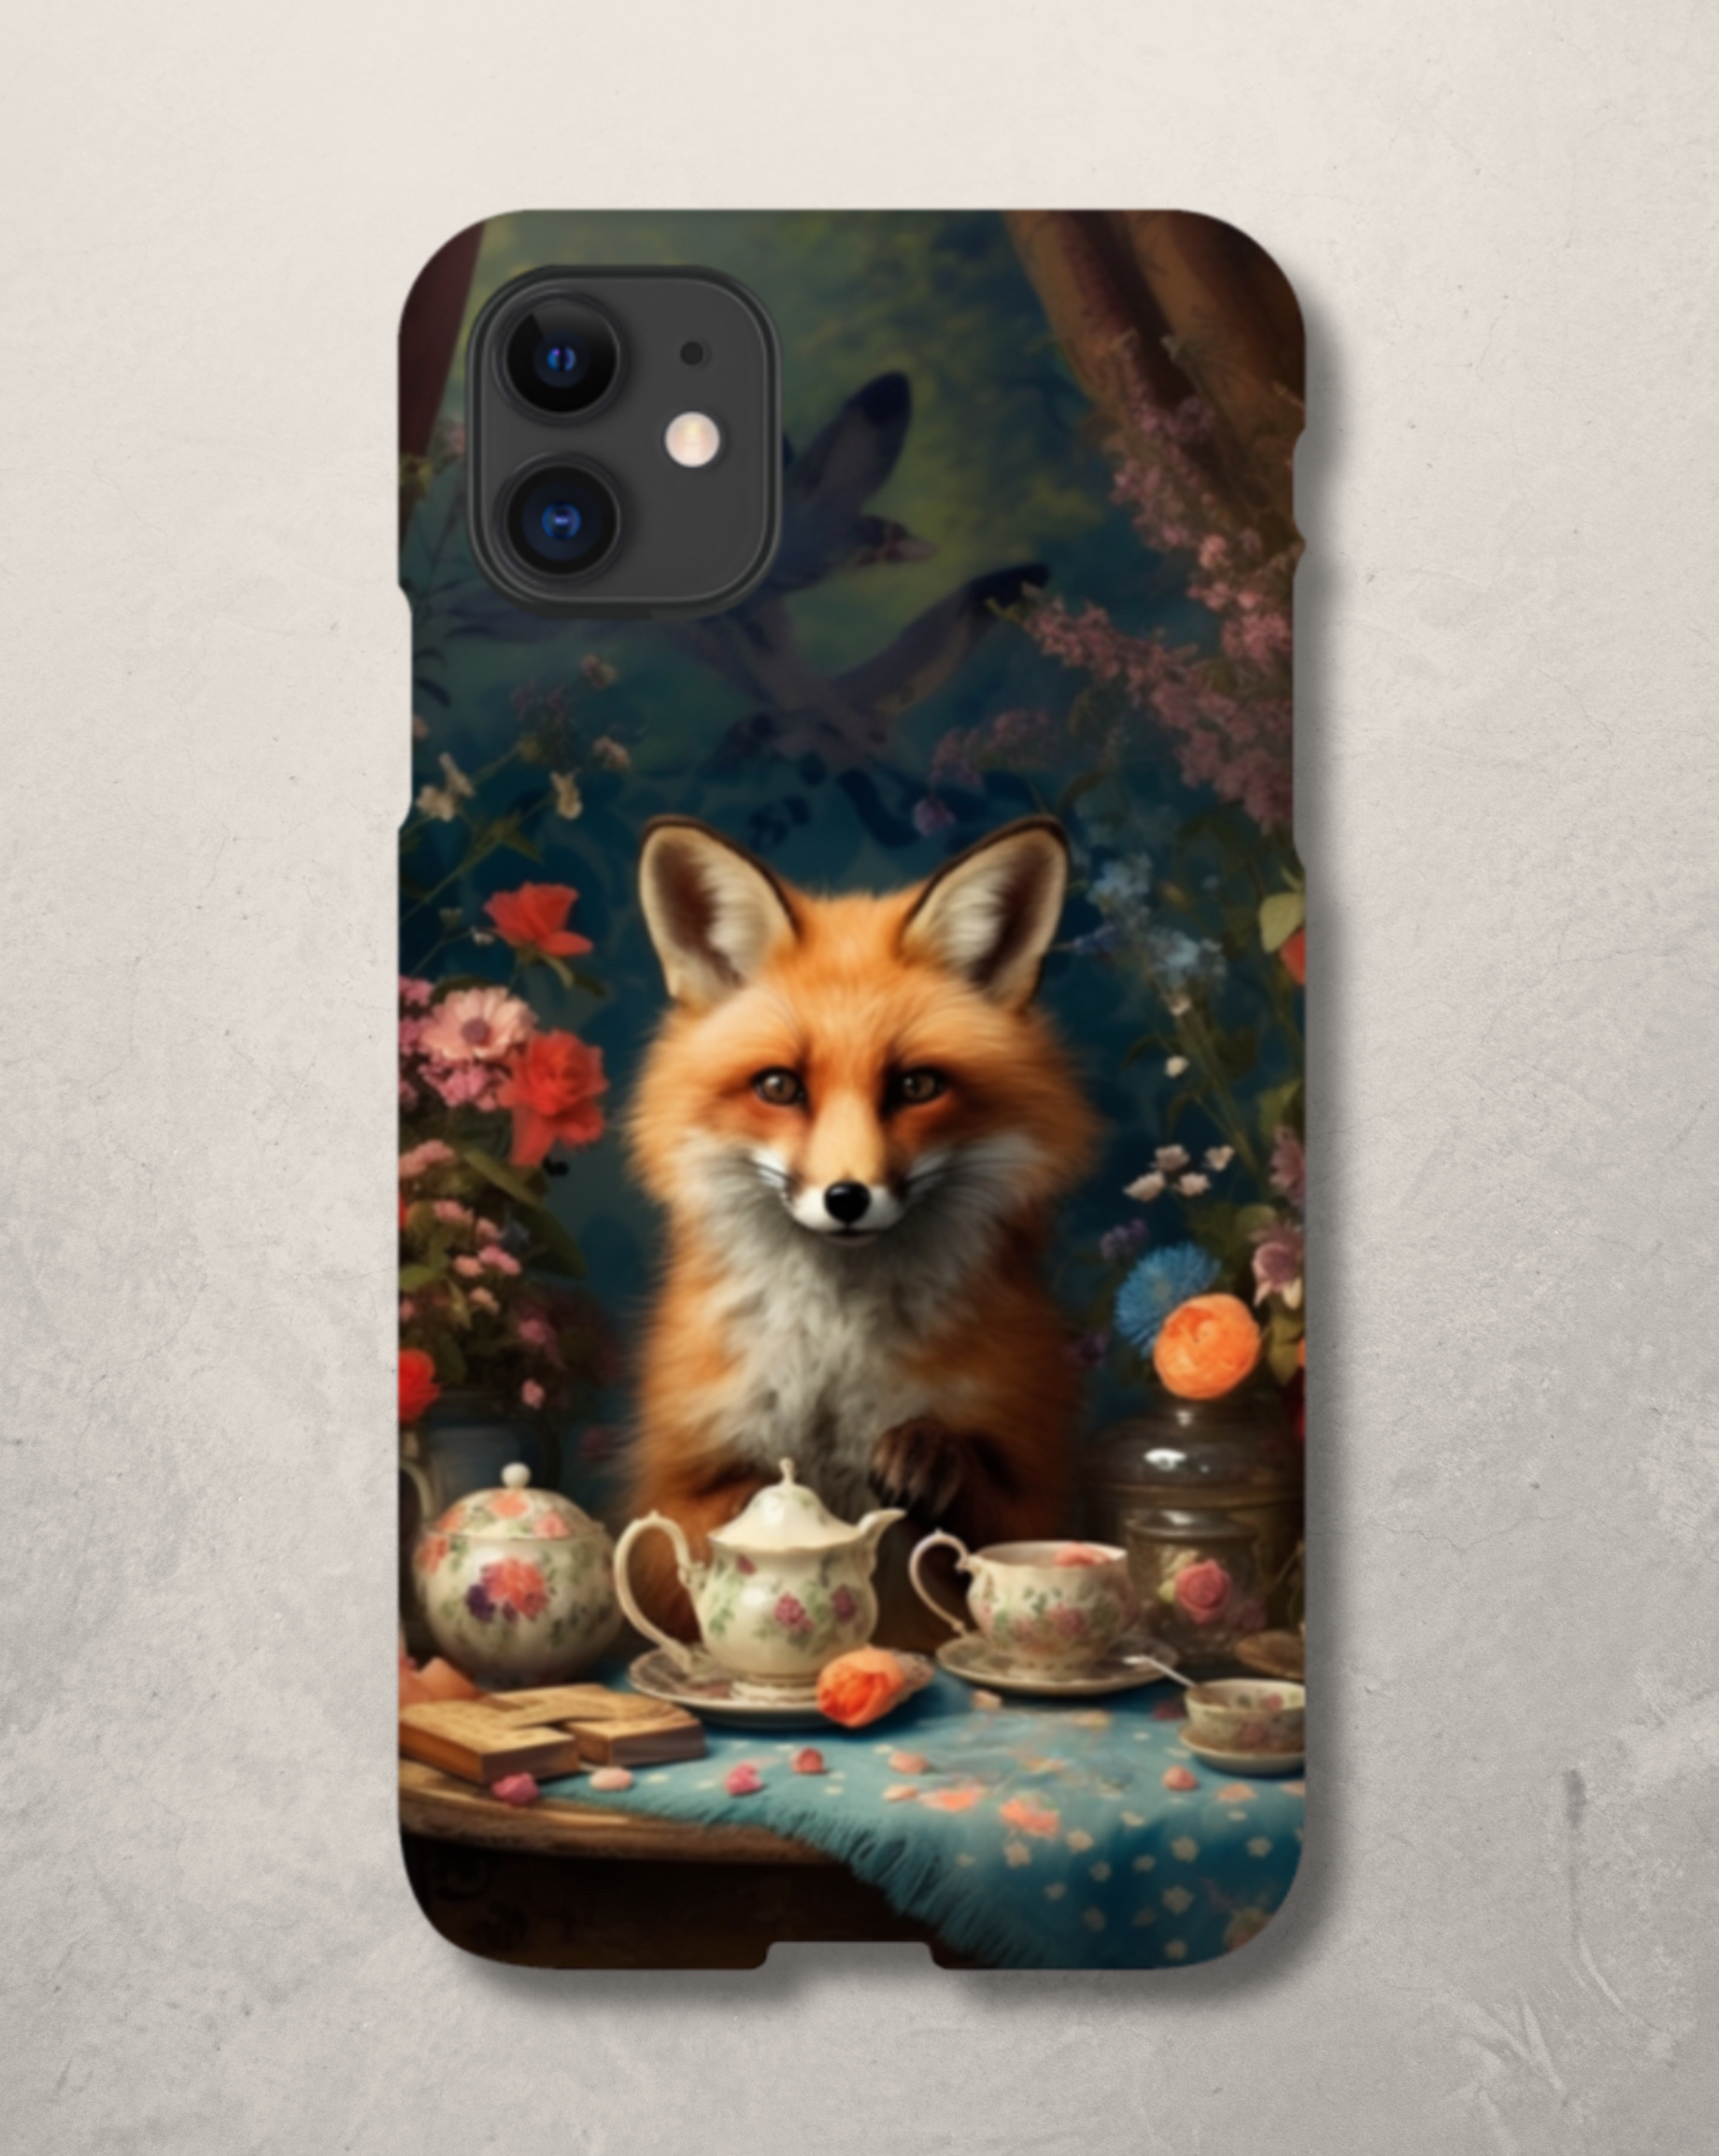 Fox phone case for iPhone Samsung 